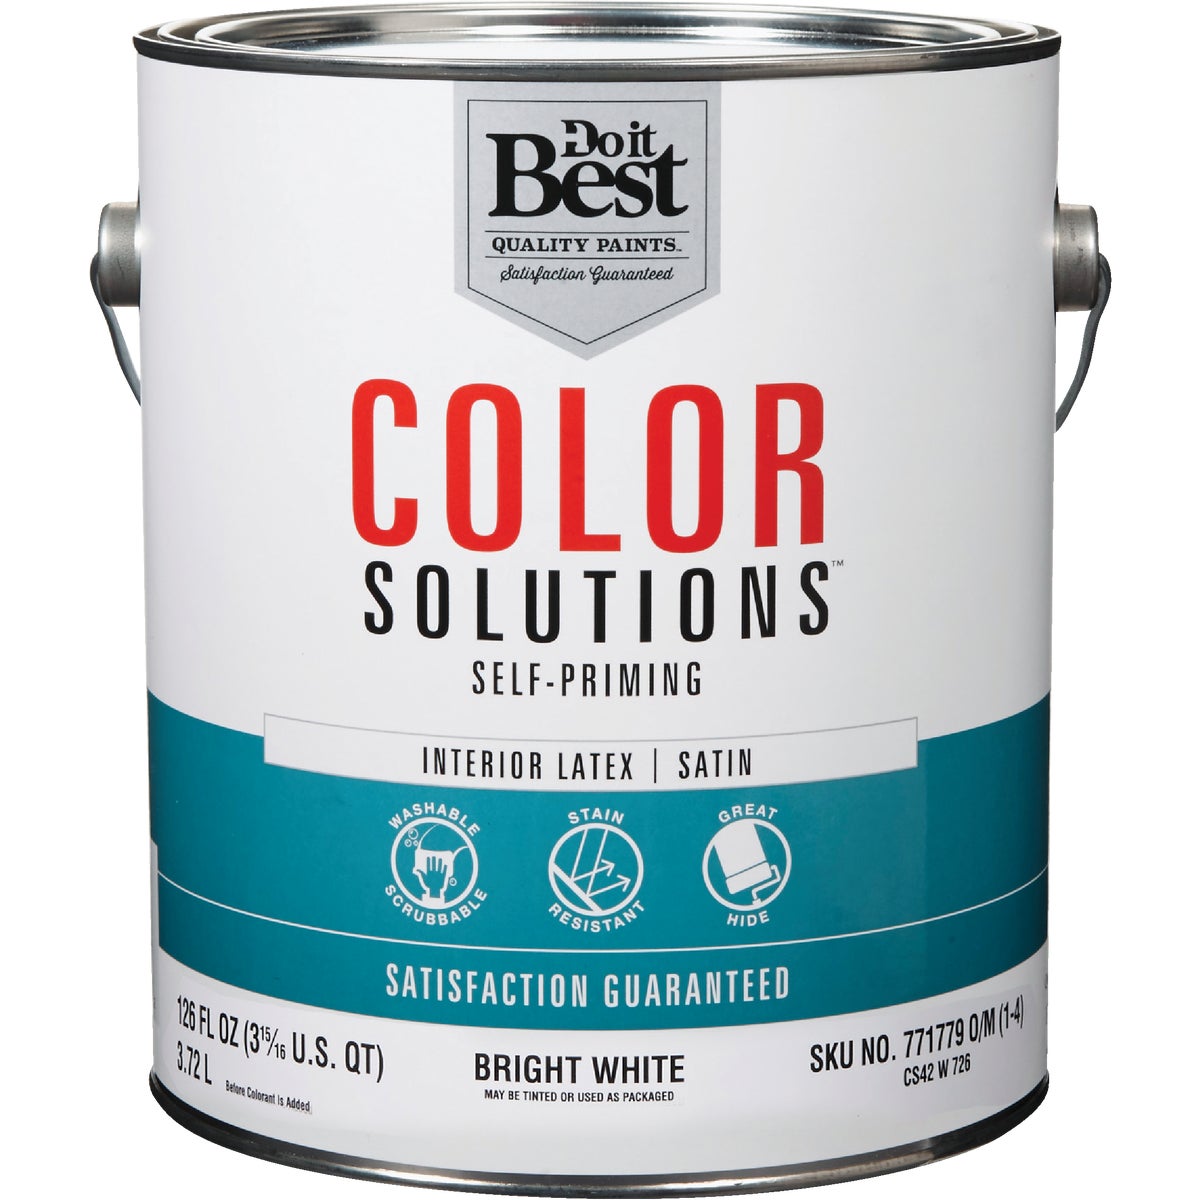 Item 771779, Self-priming paint provides long-term durability that is washable and 